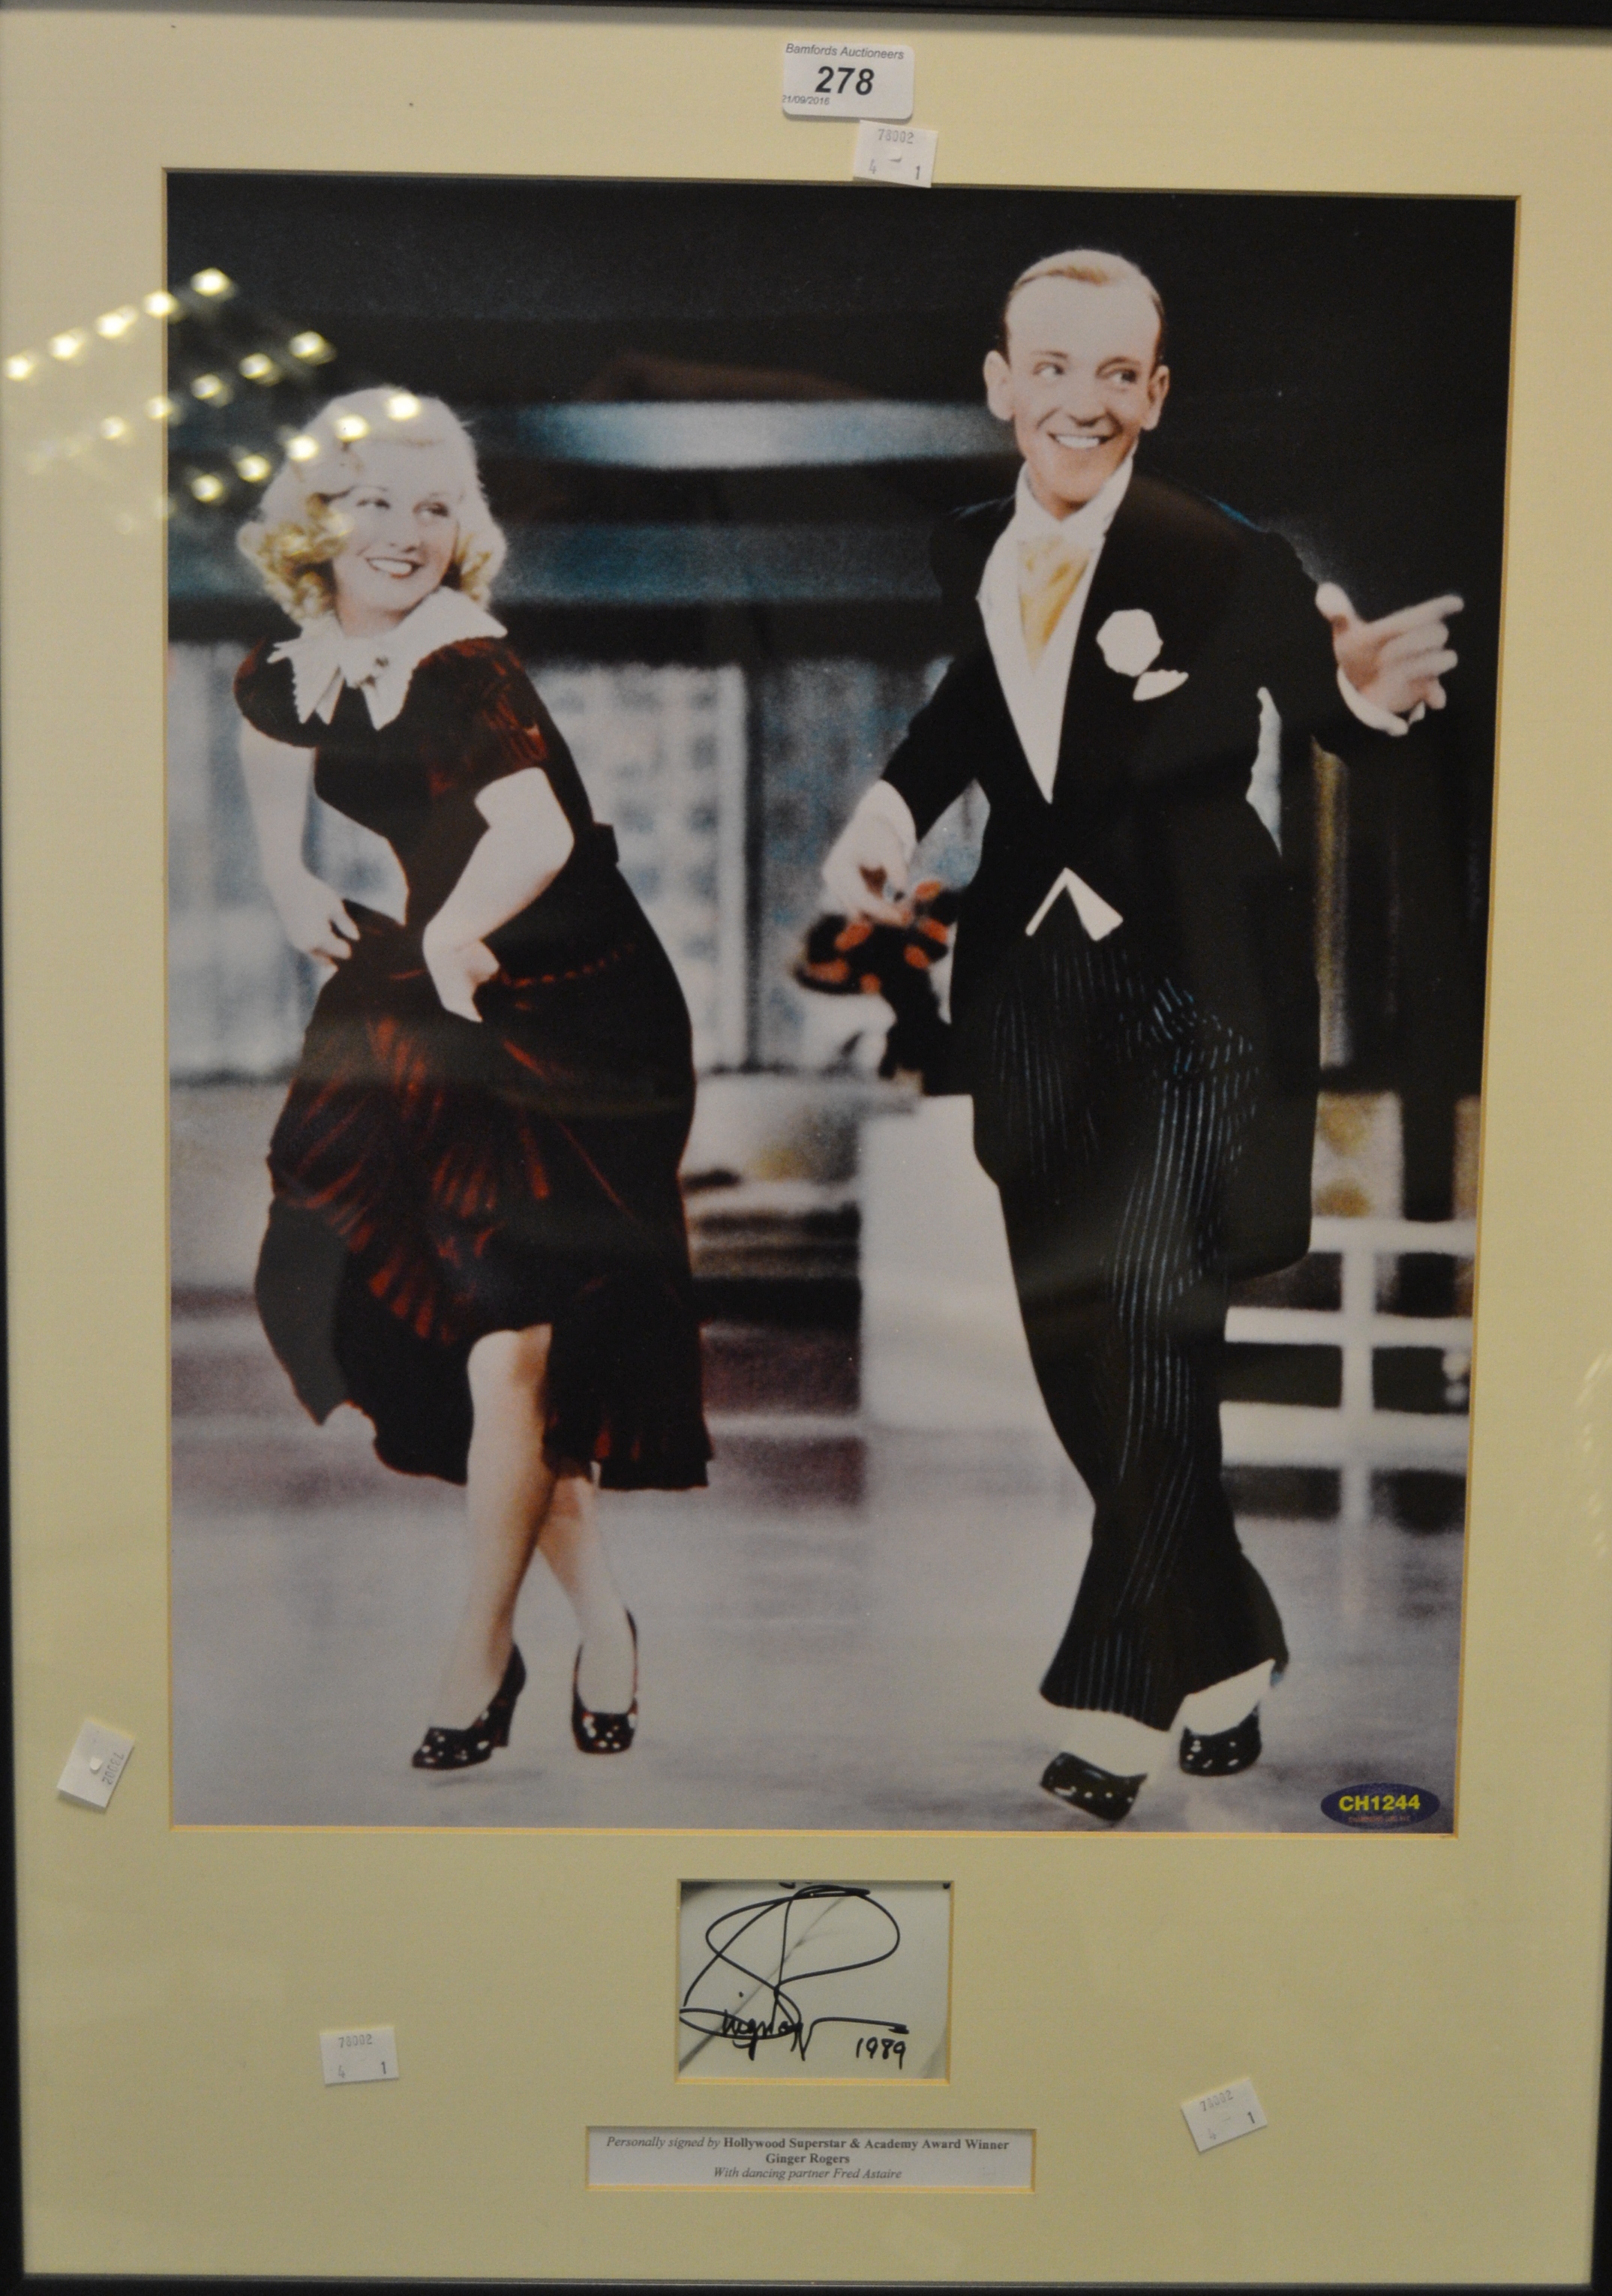 Autographs - a signed print of Ginger Rogers dancing alongside Fred Astaire, framed, dated 1989.